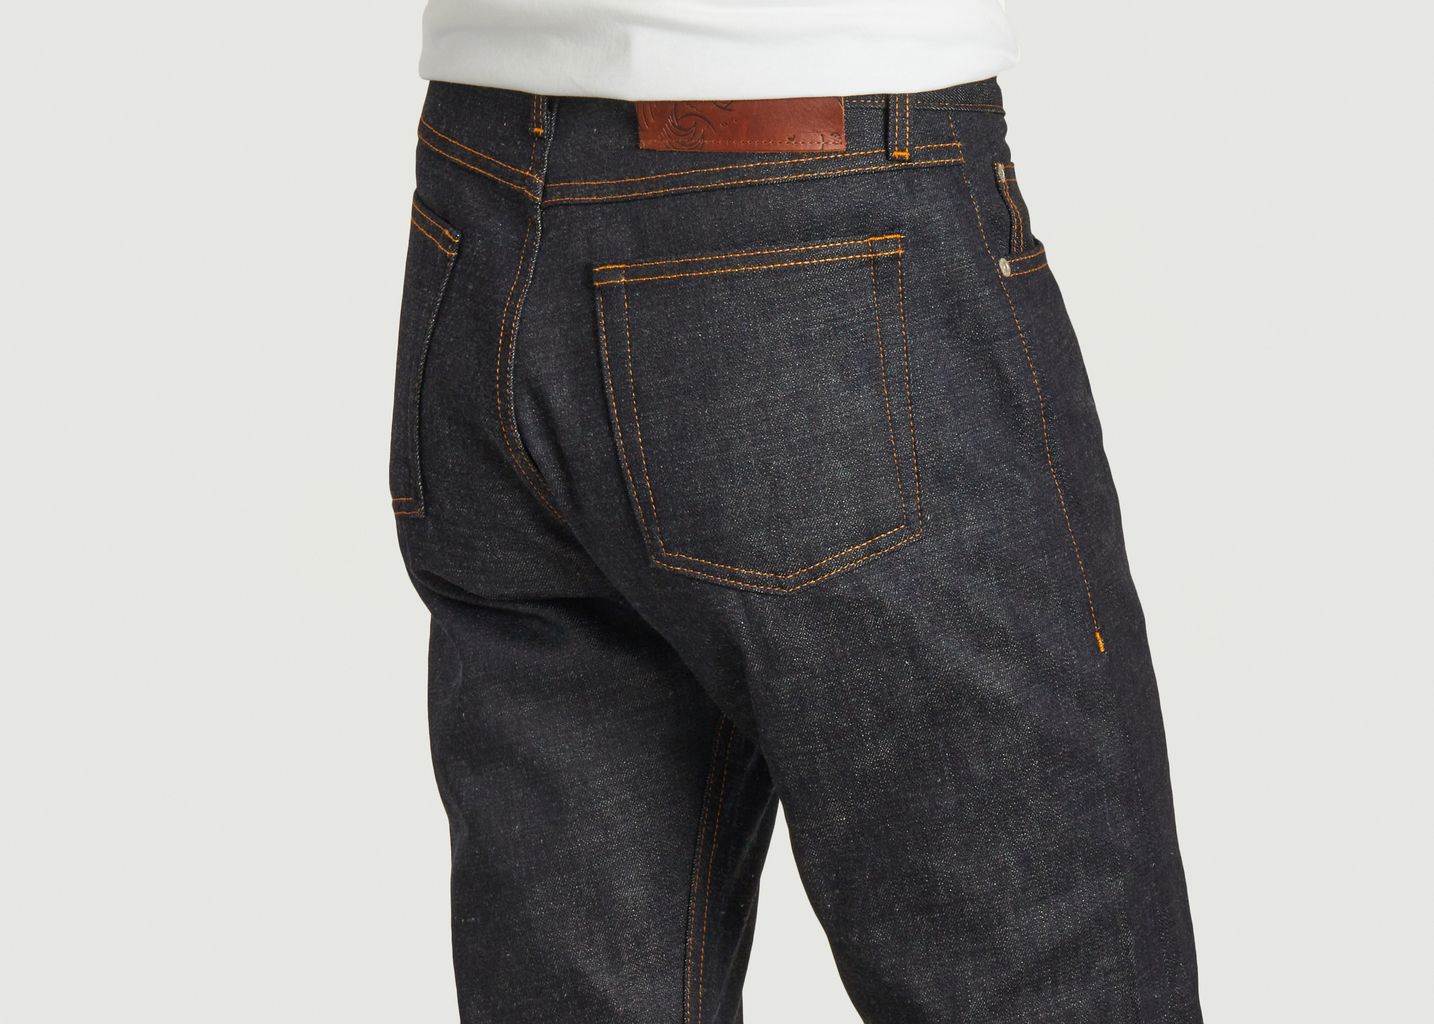 True Guy Jeans - Hard + Soft Selvedge - Naked and Famous